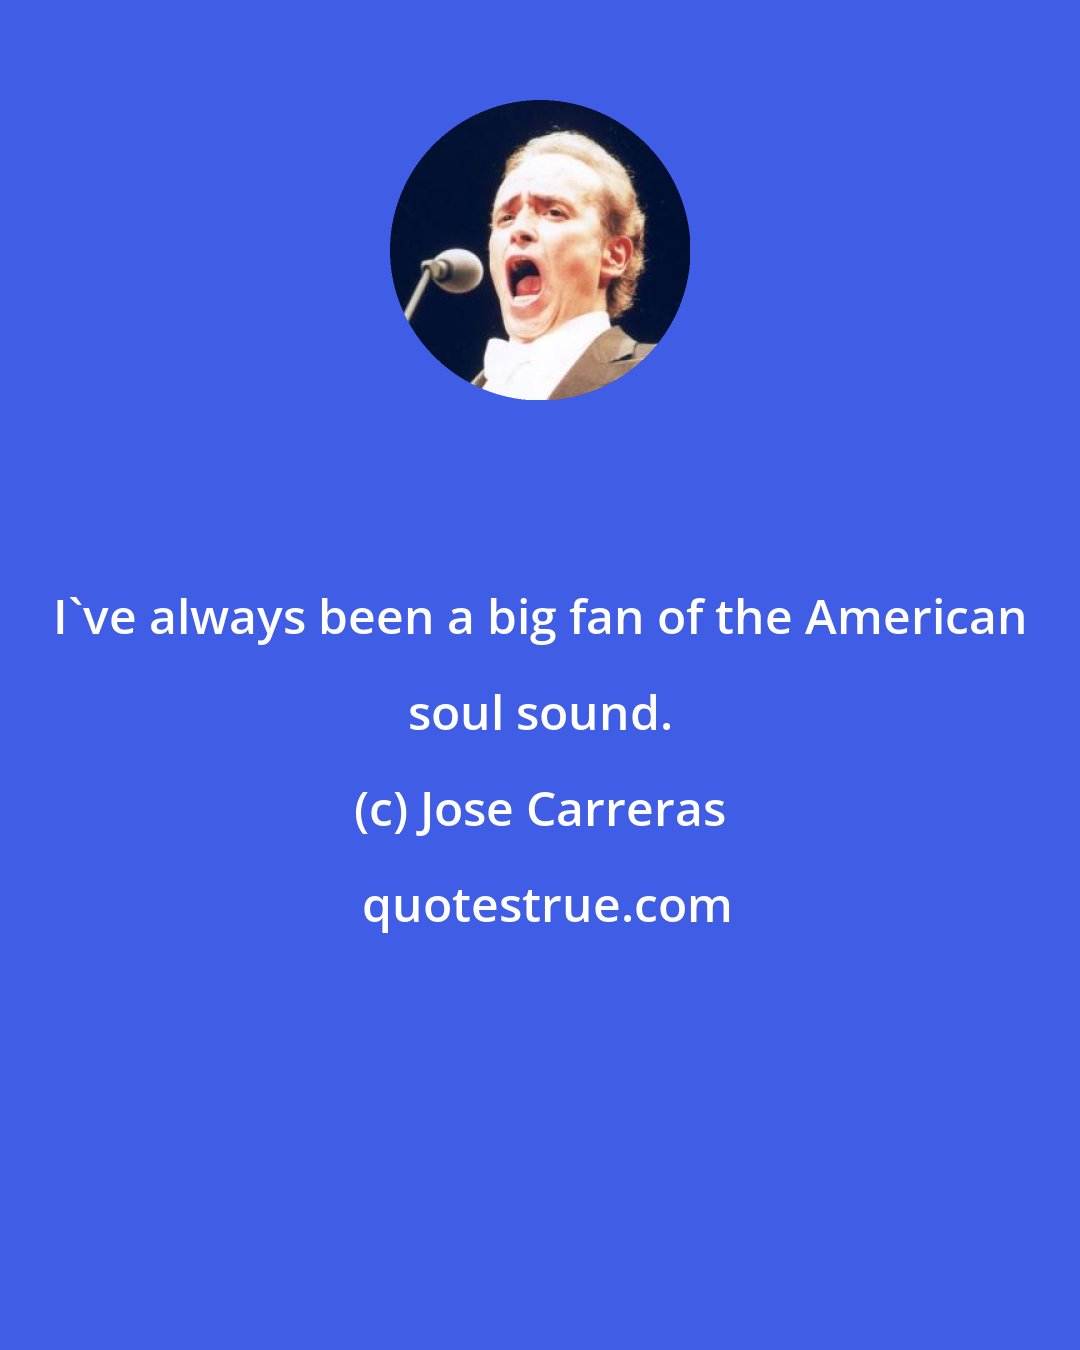 Jose Carreras: I've always been a big fan of the American soul sound.